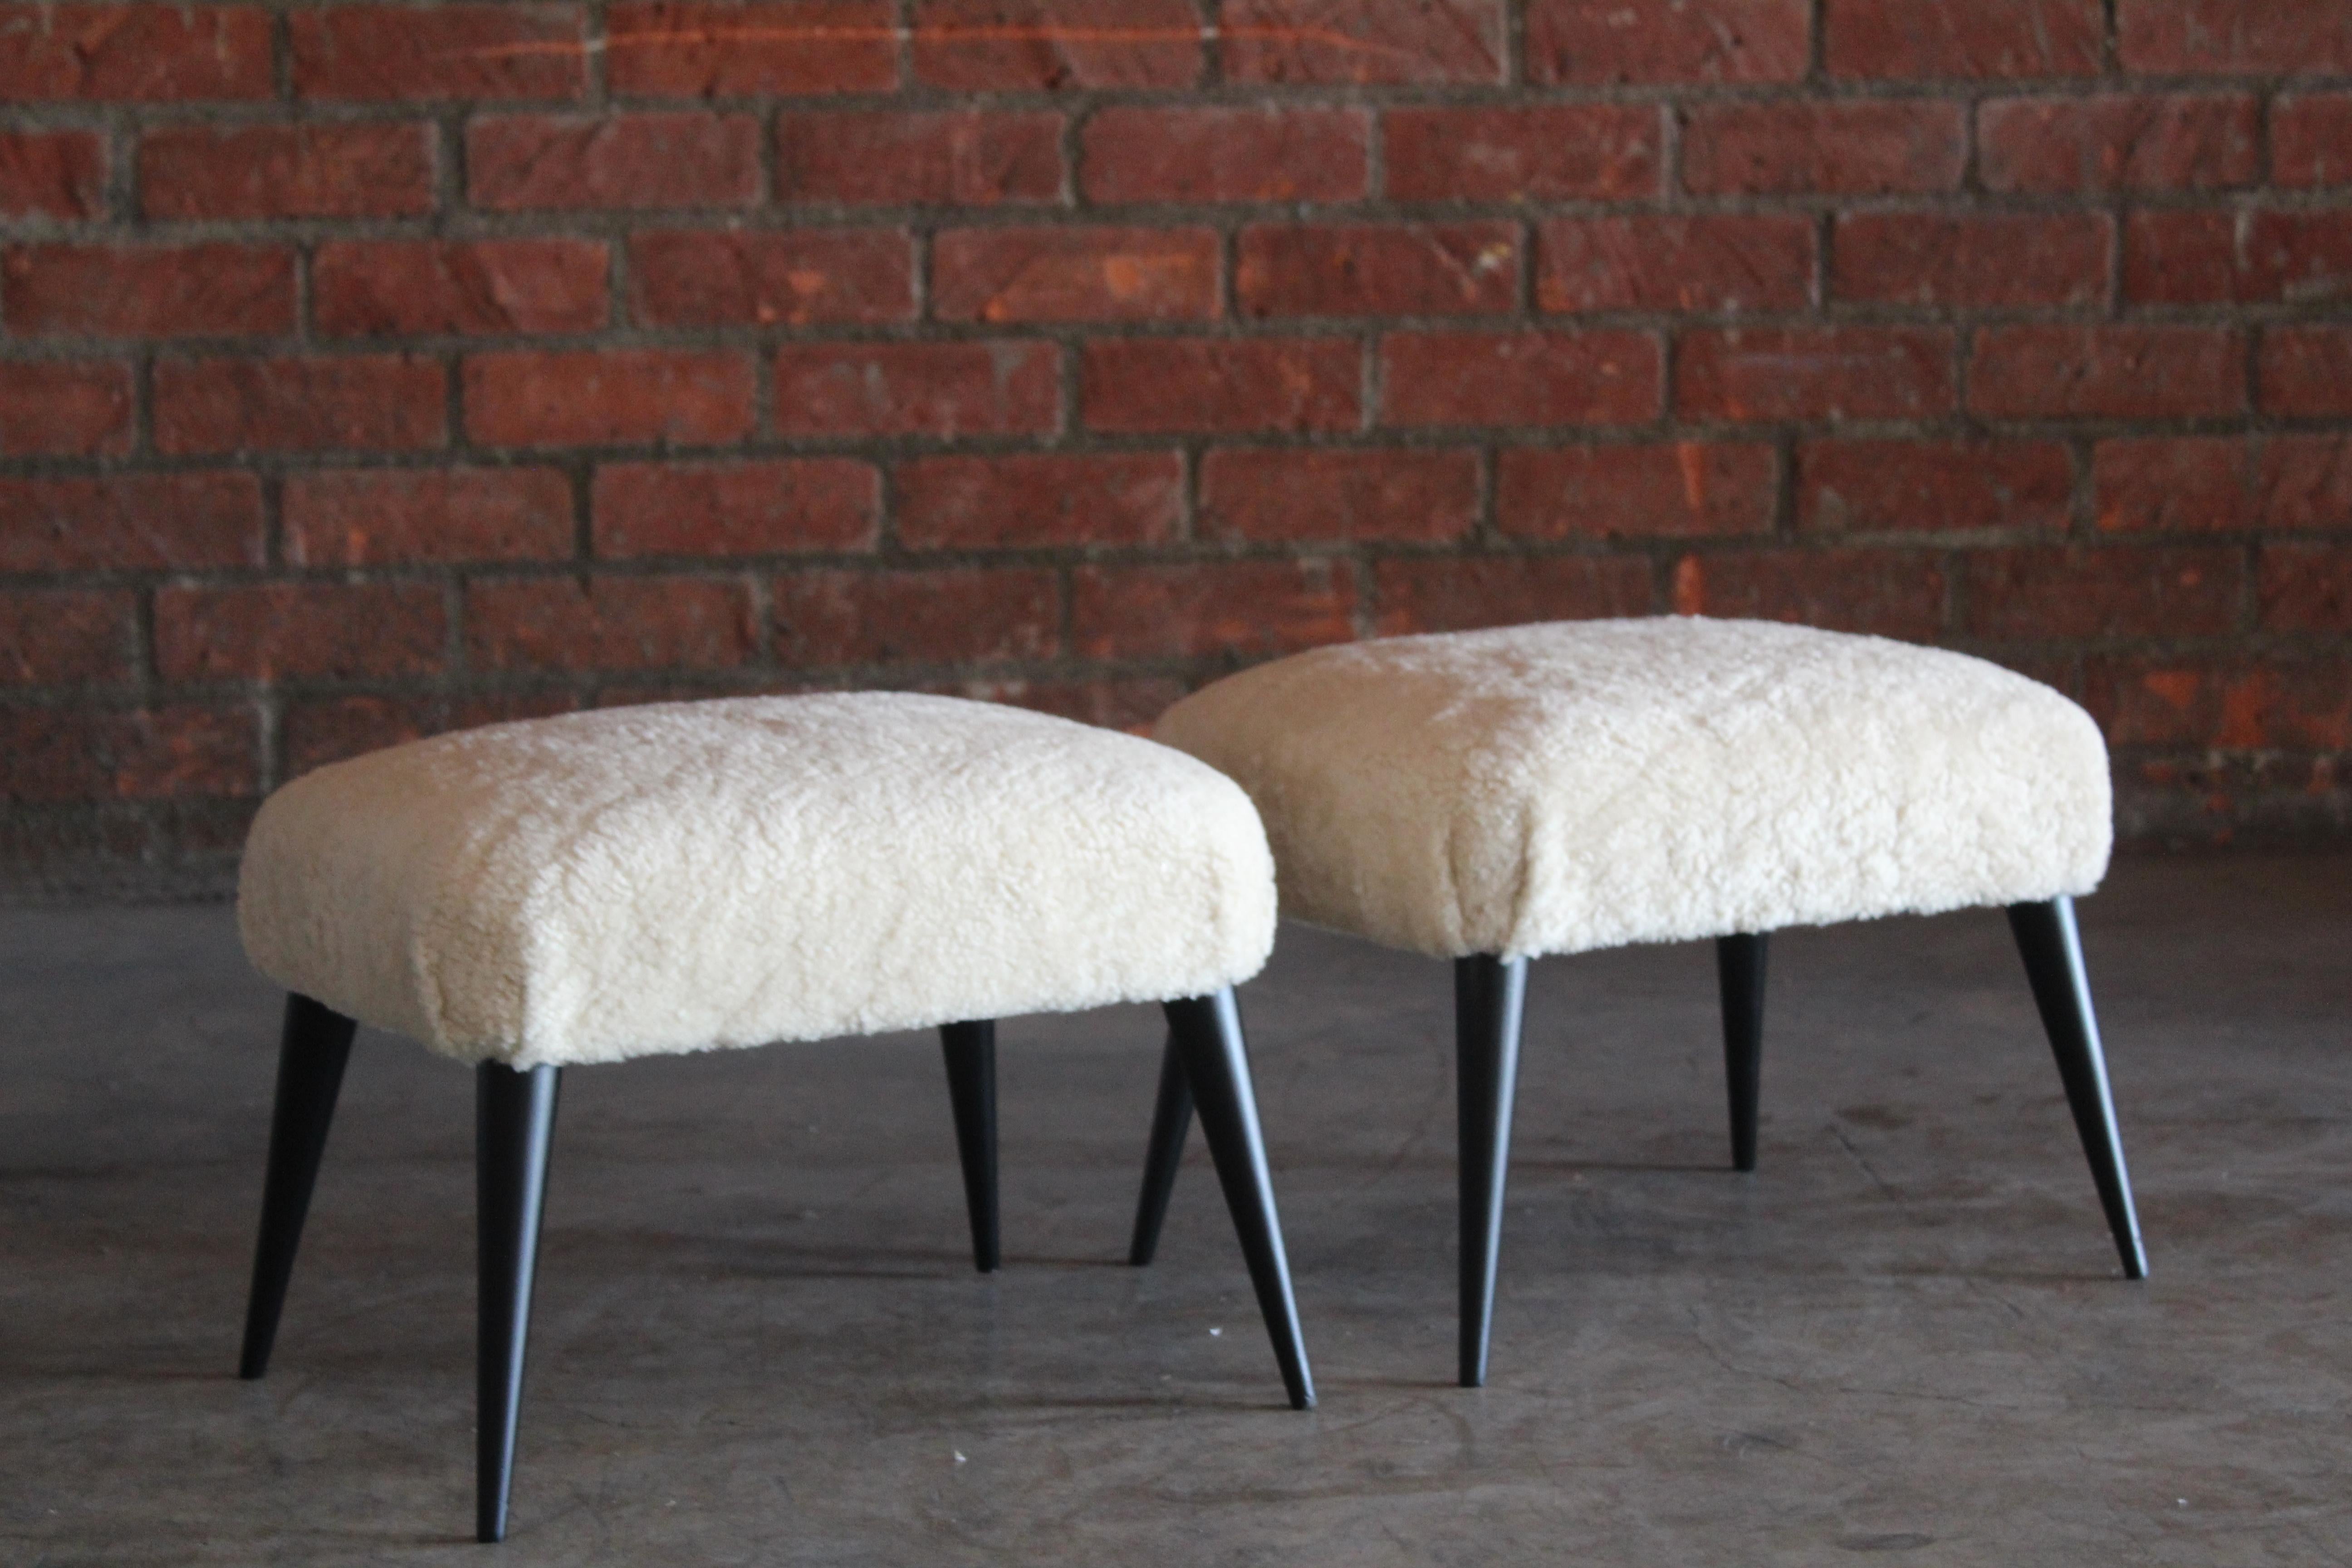 Pair of 1950s Italian stools, completely restored and reupholstered in sheepskin. The walnut legs have been refinished satin black. In overall excellent condition. Sold as a pair.